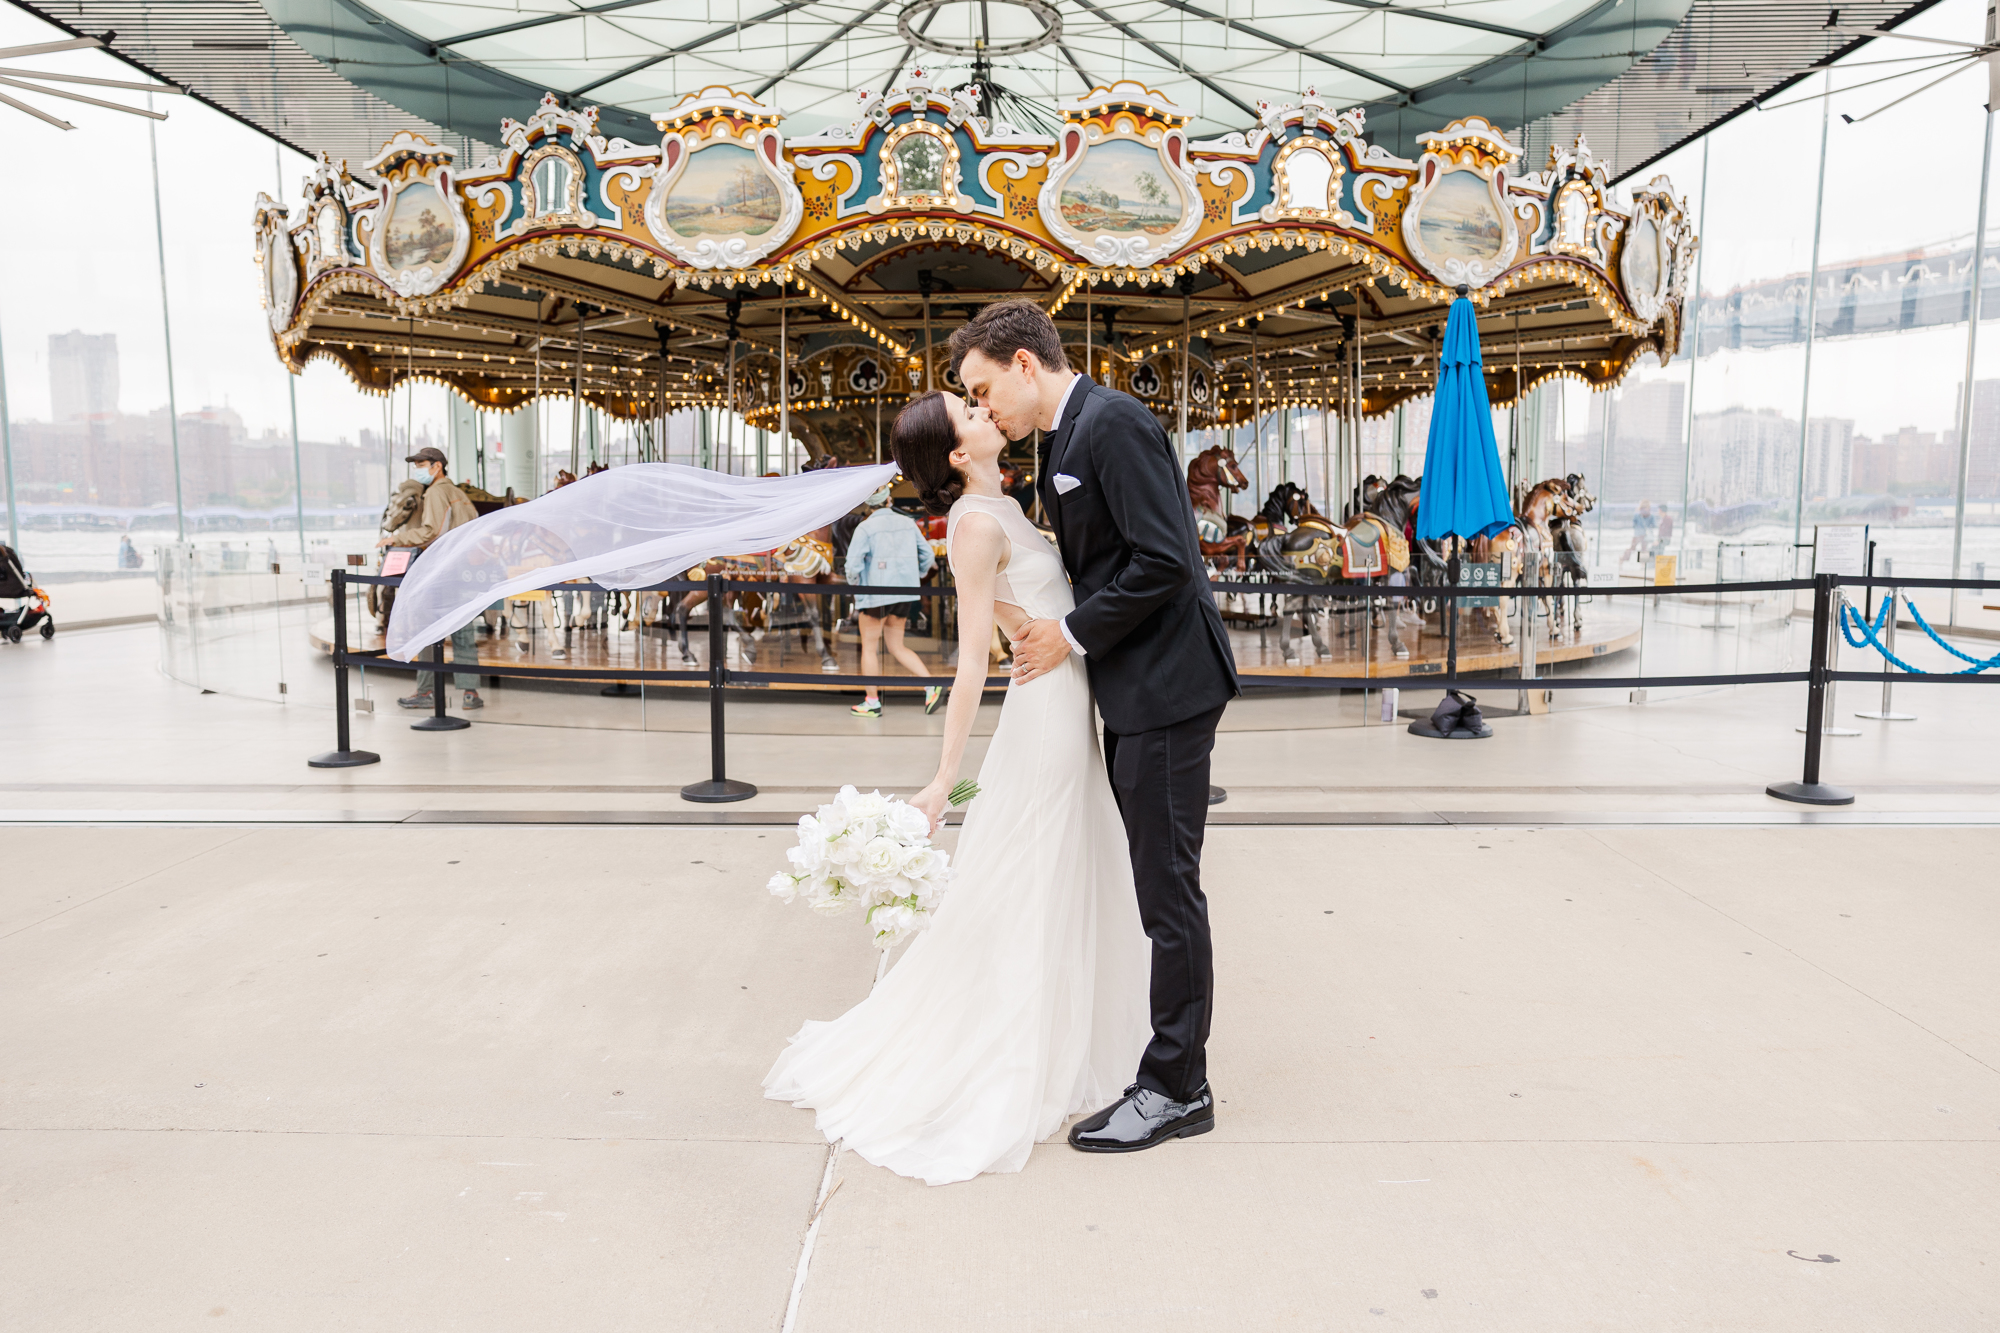 Picturesque DUMBO, Brooklyn Wedding Photos at Smack Mellon and Jane's Carousel